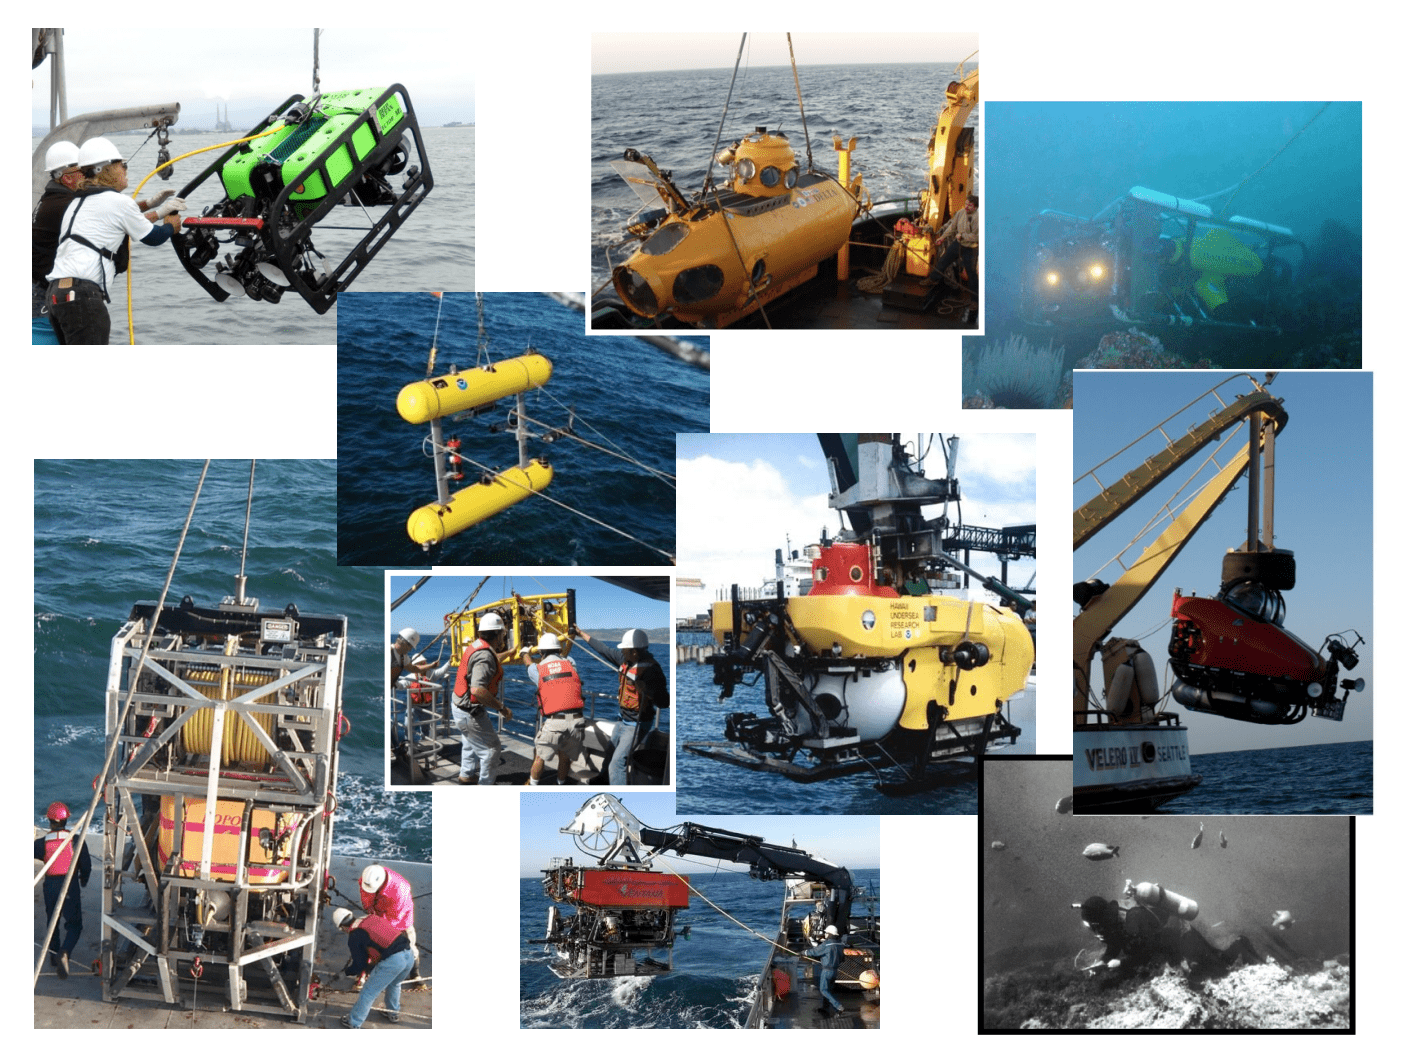 June 2015 - A COMPARATIVE ASSESSMENT OF UNDERWATER VISUAL SURVEY TOOLS: 107